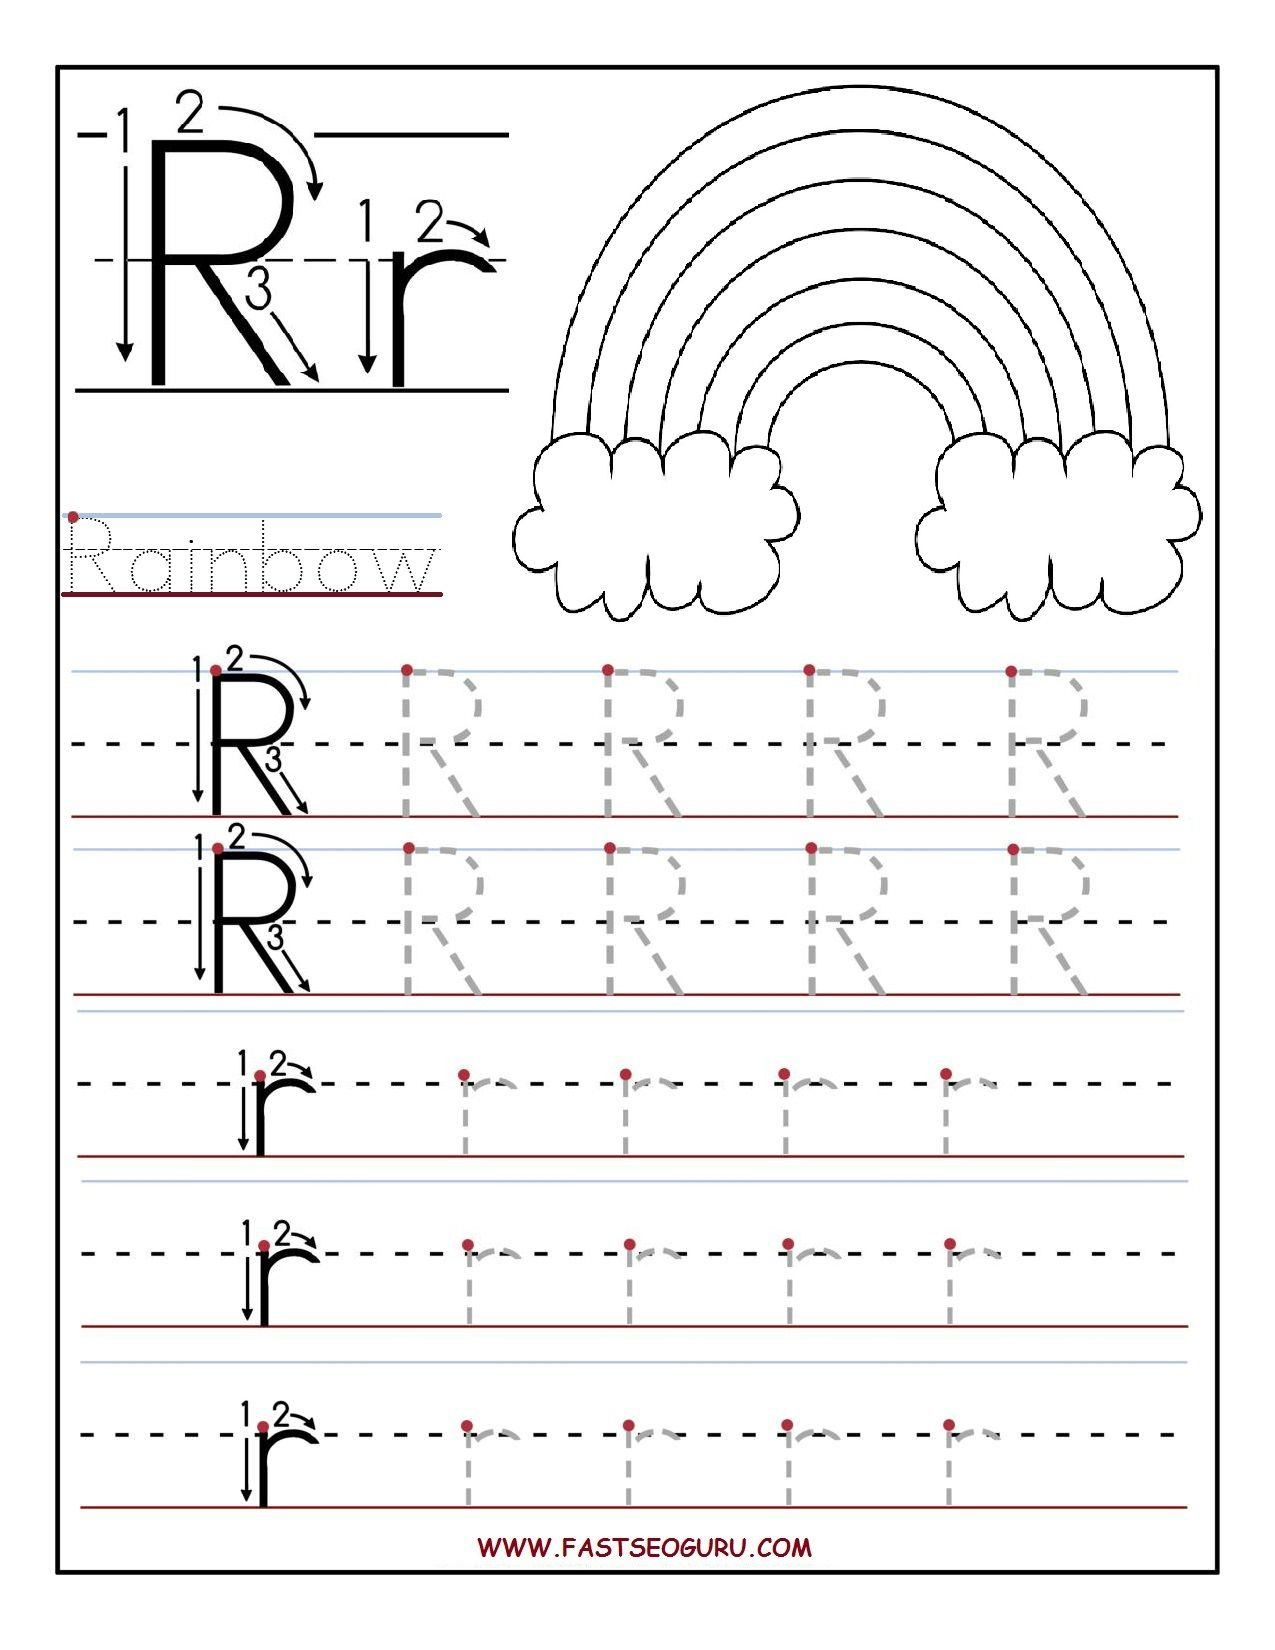 Printable Letter R Tracing Worksheets For Preschool | Letter with Letter R Worksheets For Kindergarten